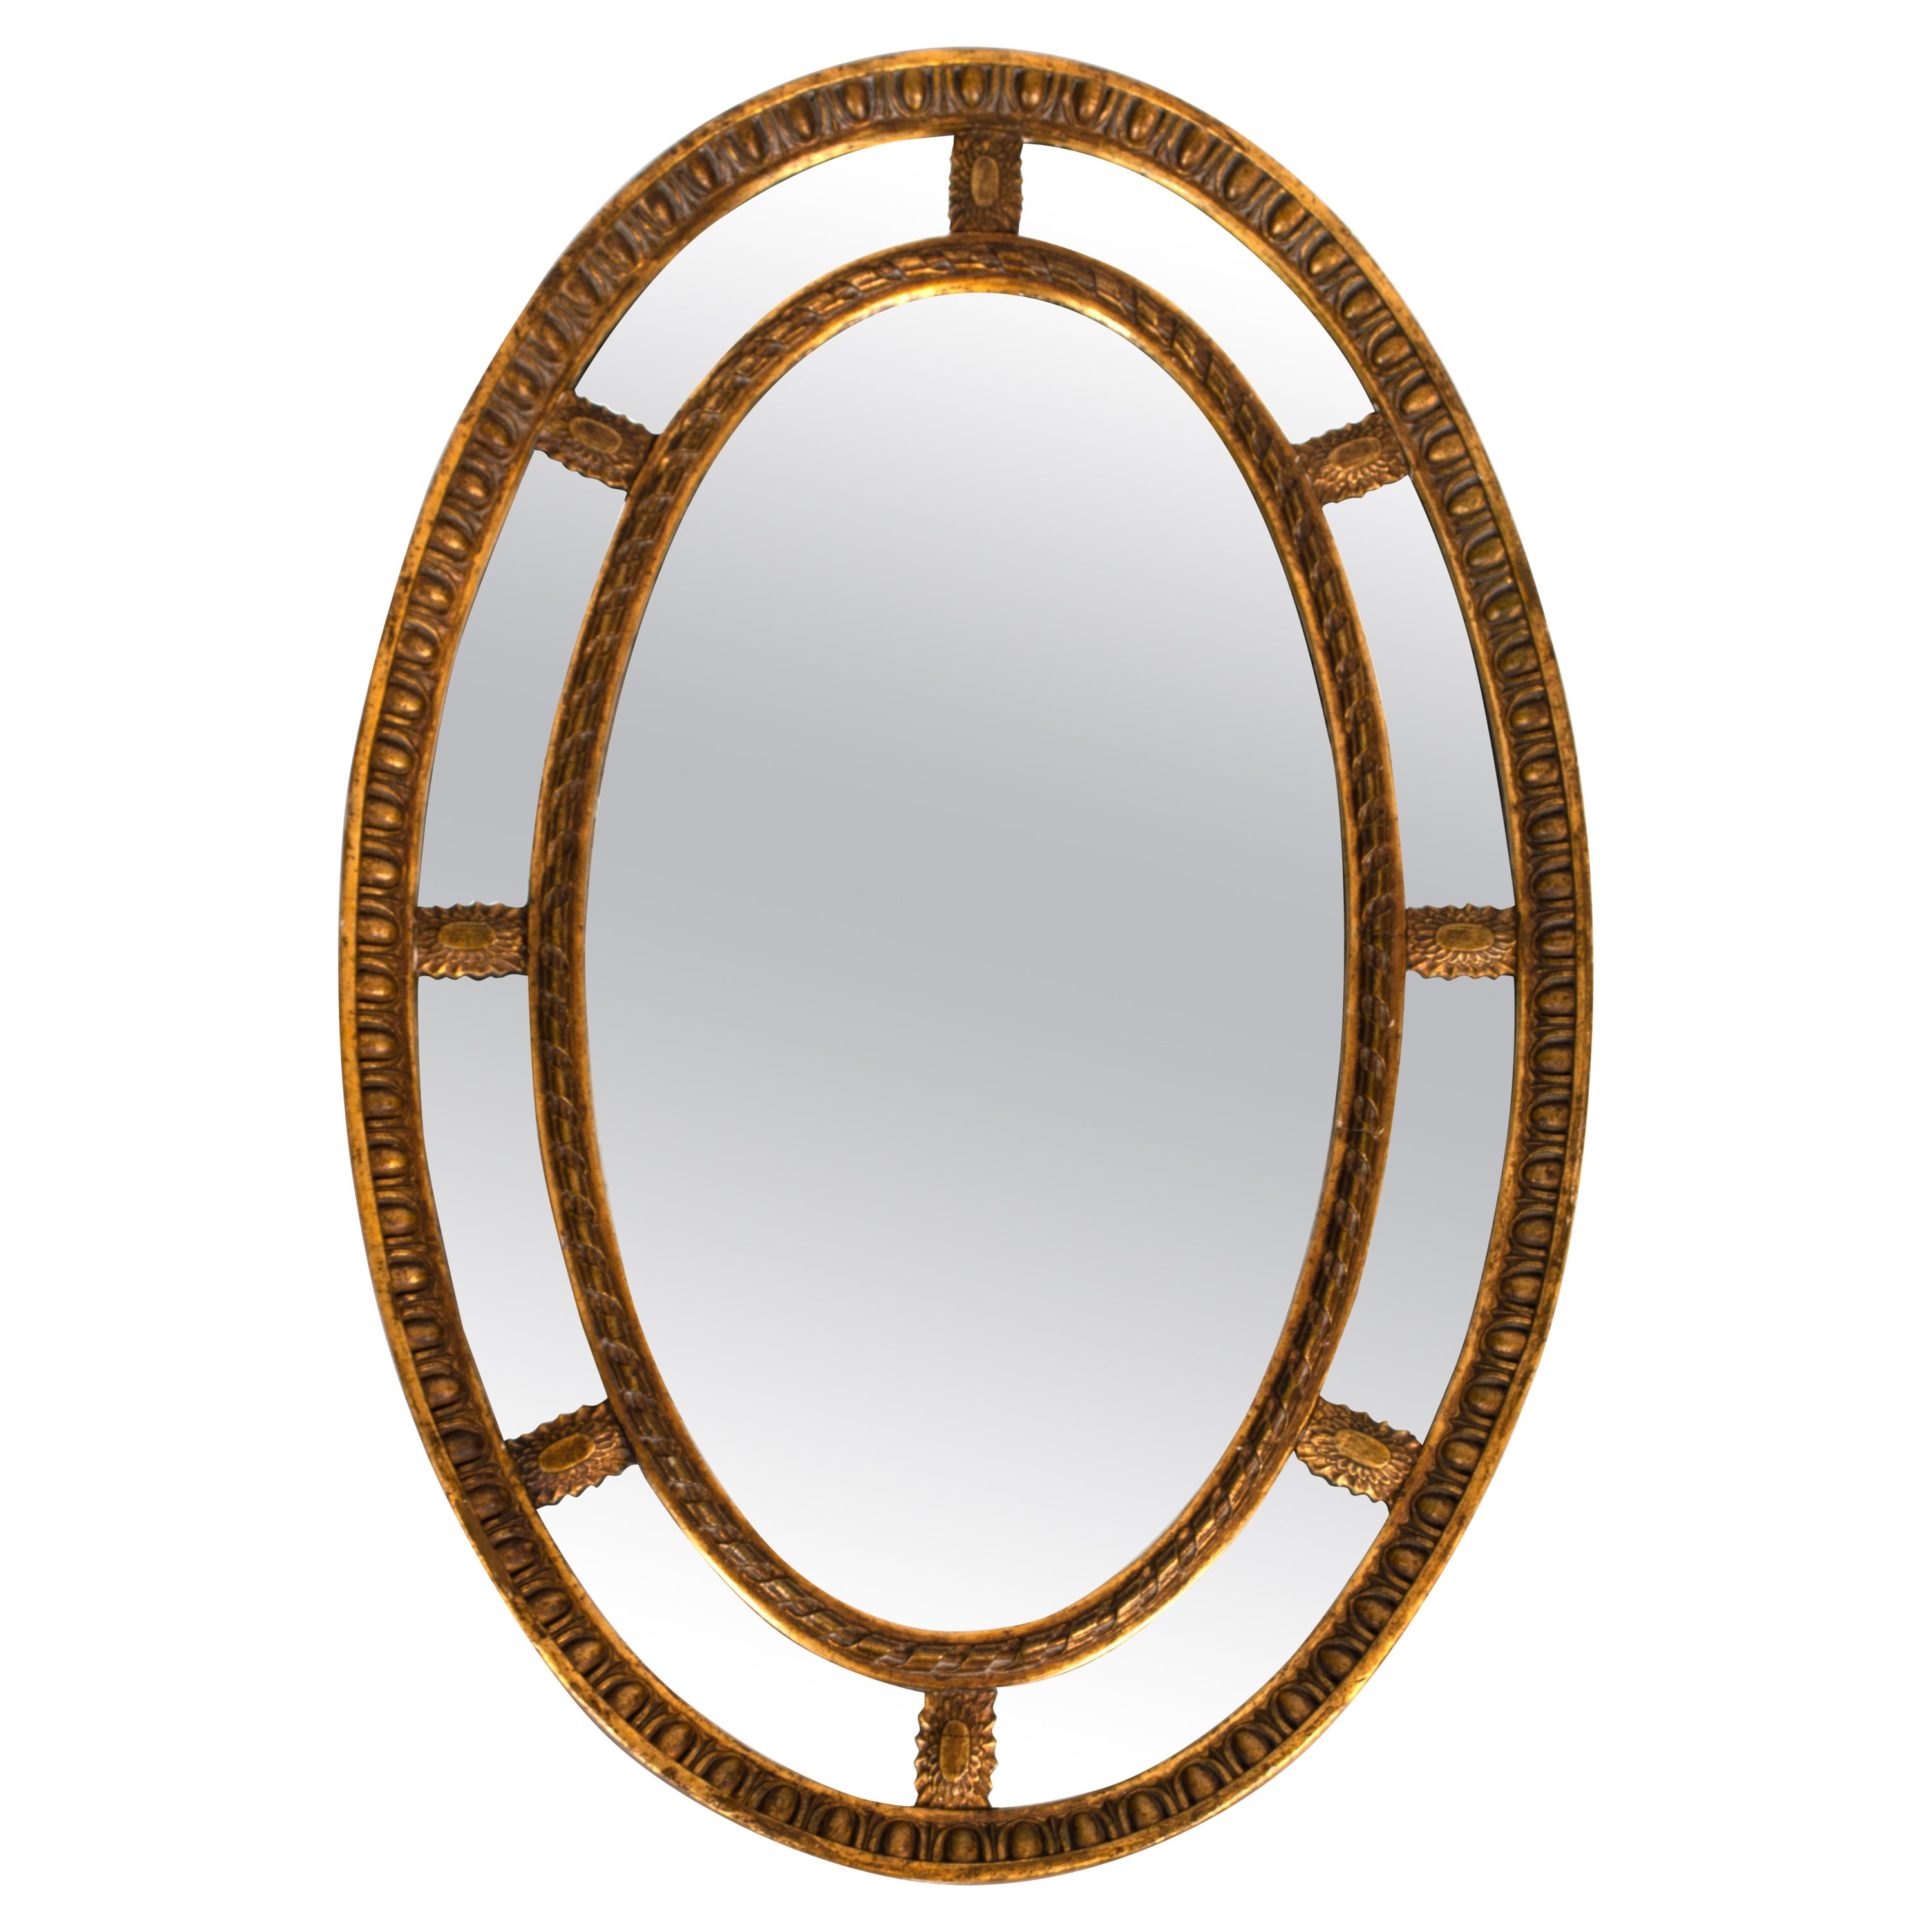 Large Antique English Neoclassic Oval Gilt-Wood & Gesso Sectional Mirror, C.1910 For Sale